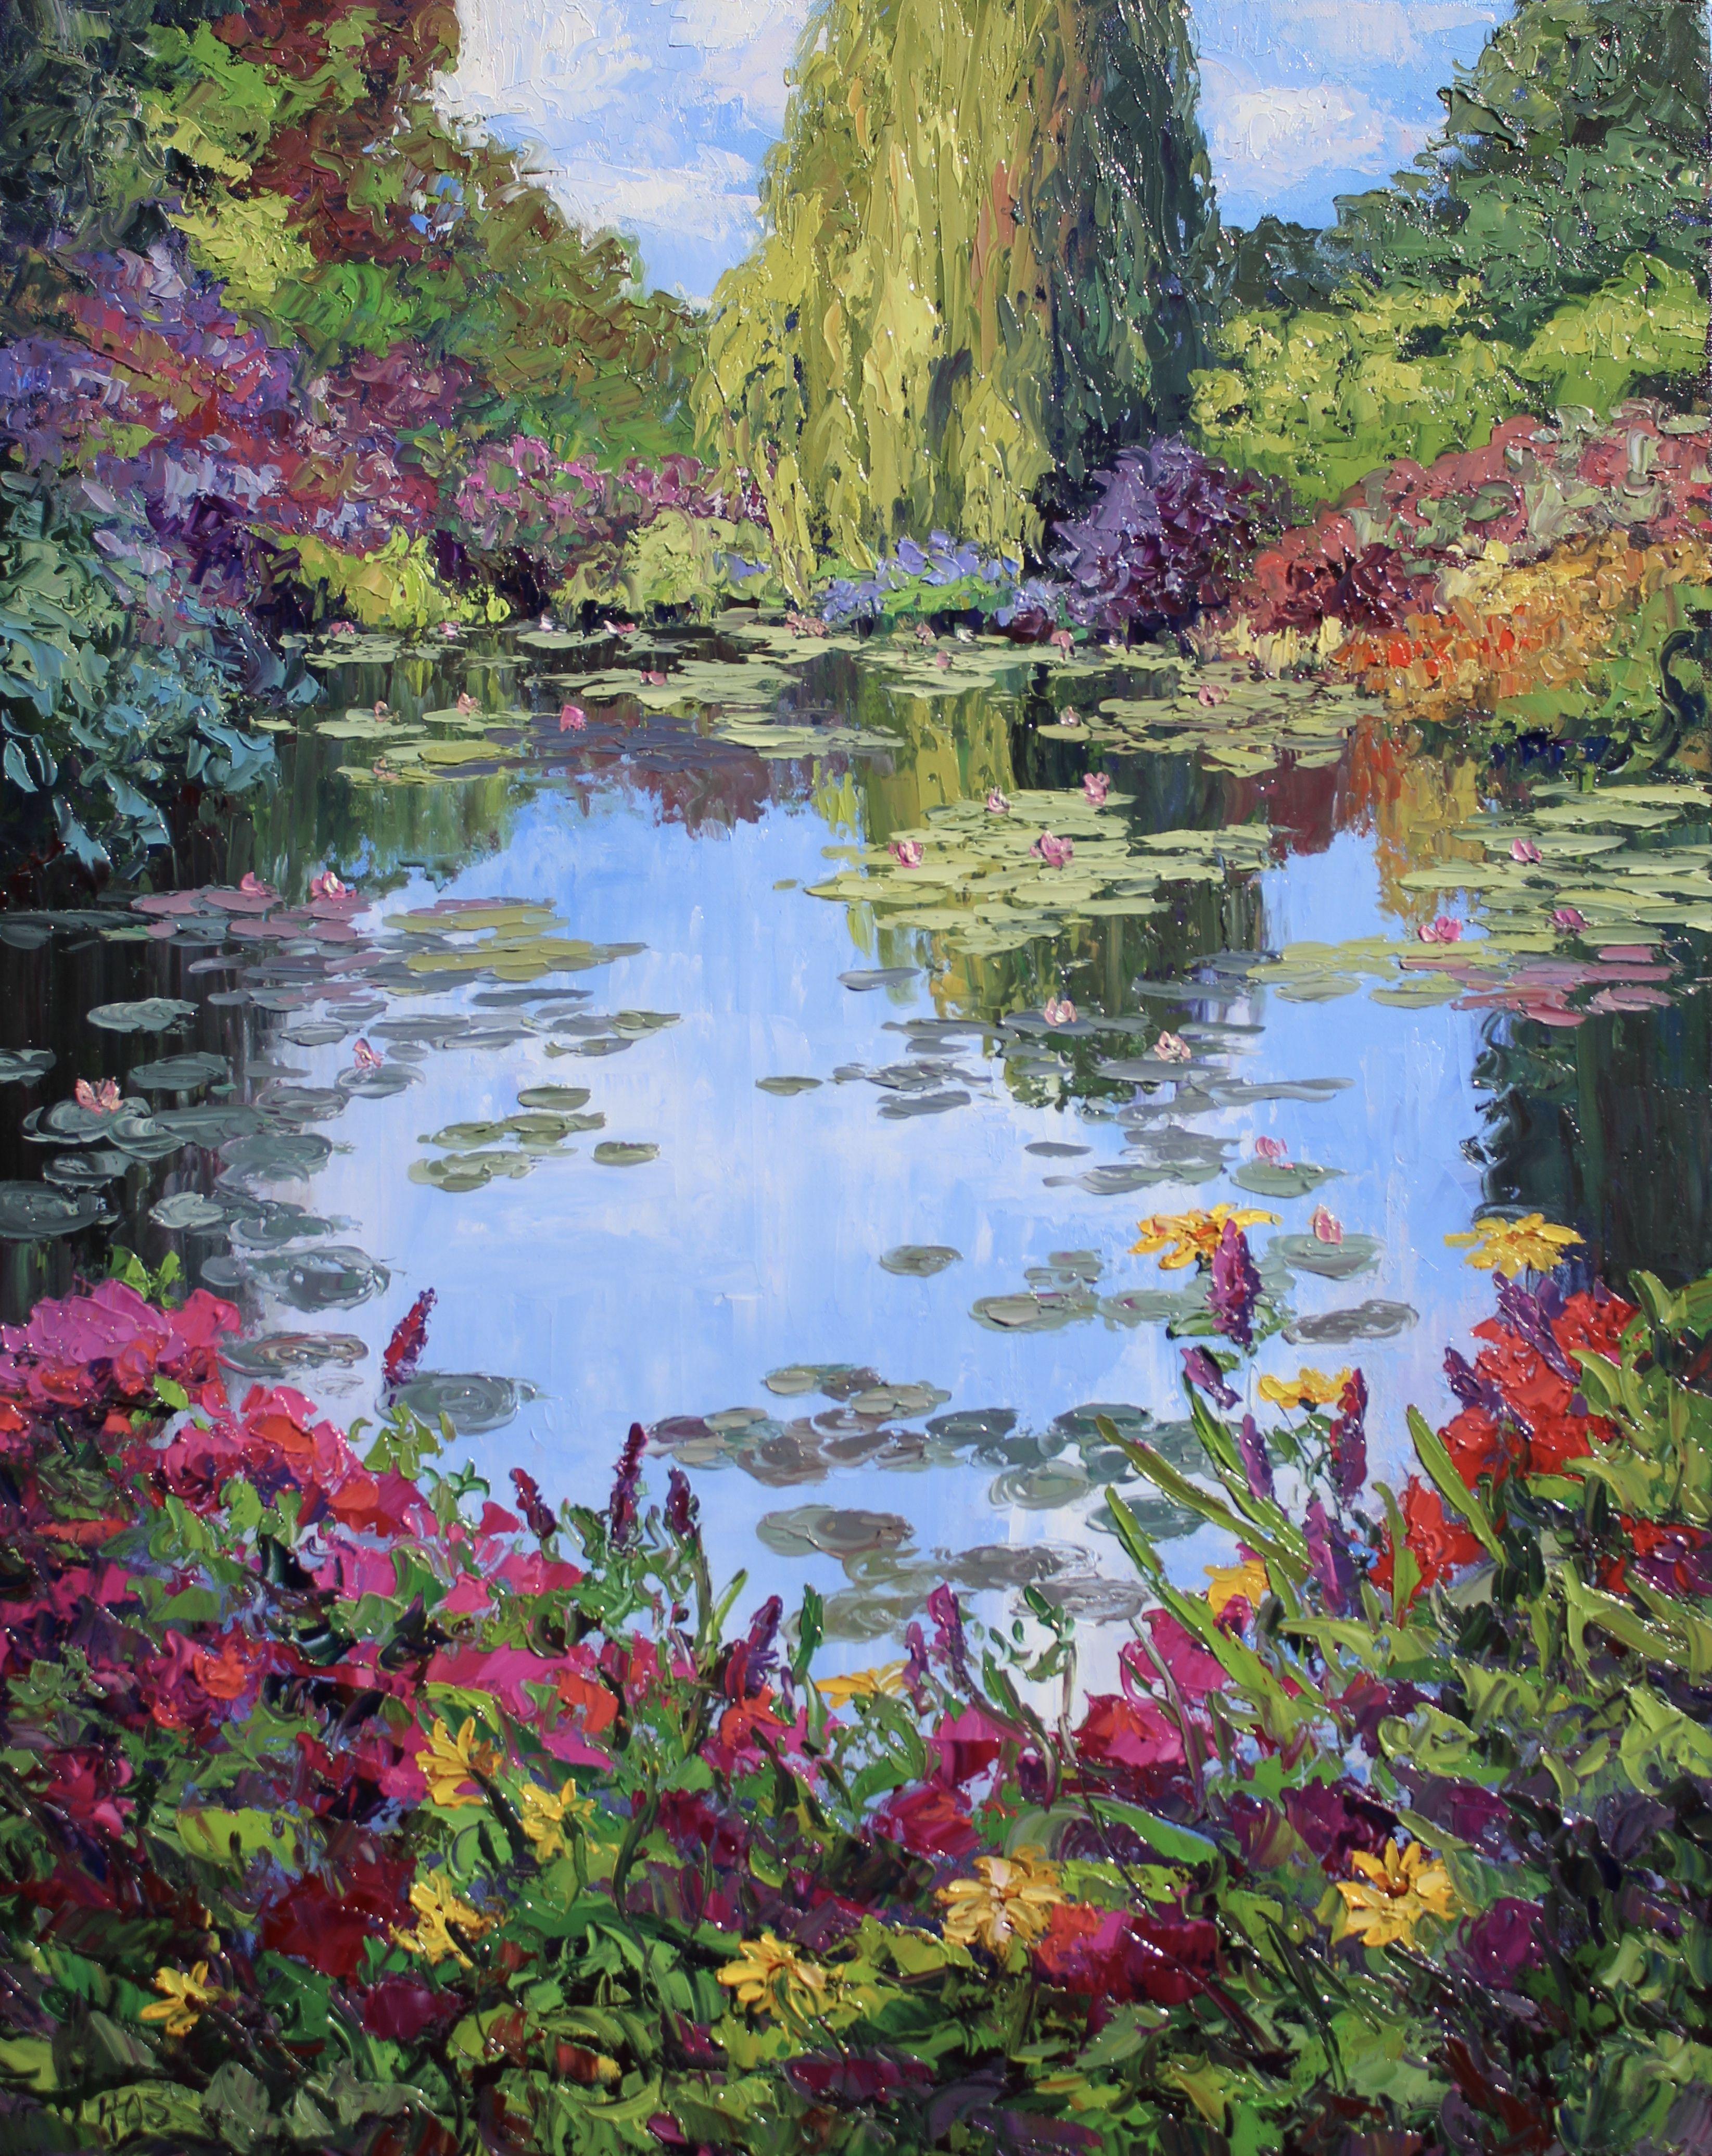 An original palette knife oil painting on canvas of the lovely gardens of Giverny, Monet's home in France. This is painted with thick, colorful strokes of oil paint in a contemporary impressionist style.  This painting comes with a certificate of